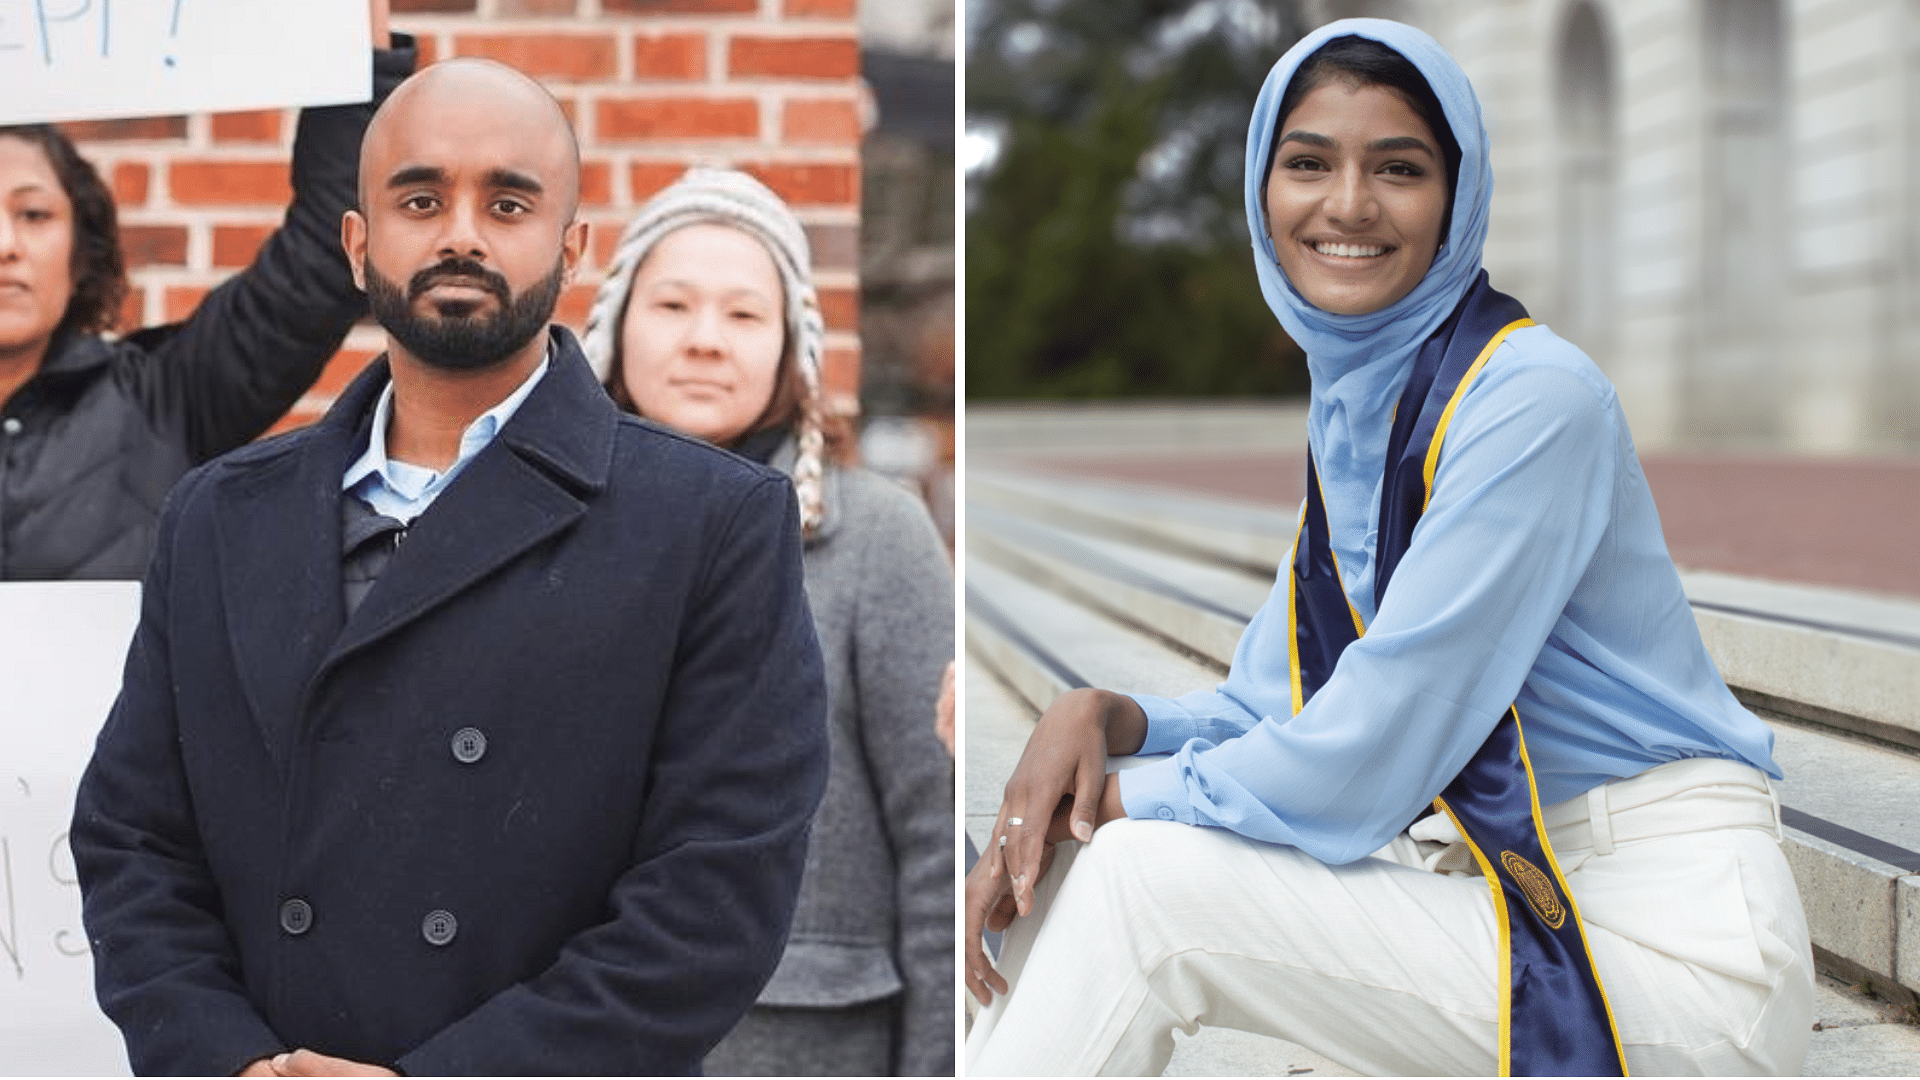 <div class="paragraphs"><p>Two <a href="https://www.thequint.com/topic/united-states">Indian American</a> candidates have taken the next step towards becoming the first South Asian Americans in the <a href="https://www.thequint.com/topic/illinois">Illinois</a> State Legislature.</p></div>